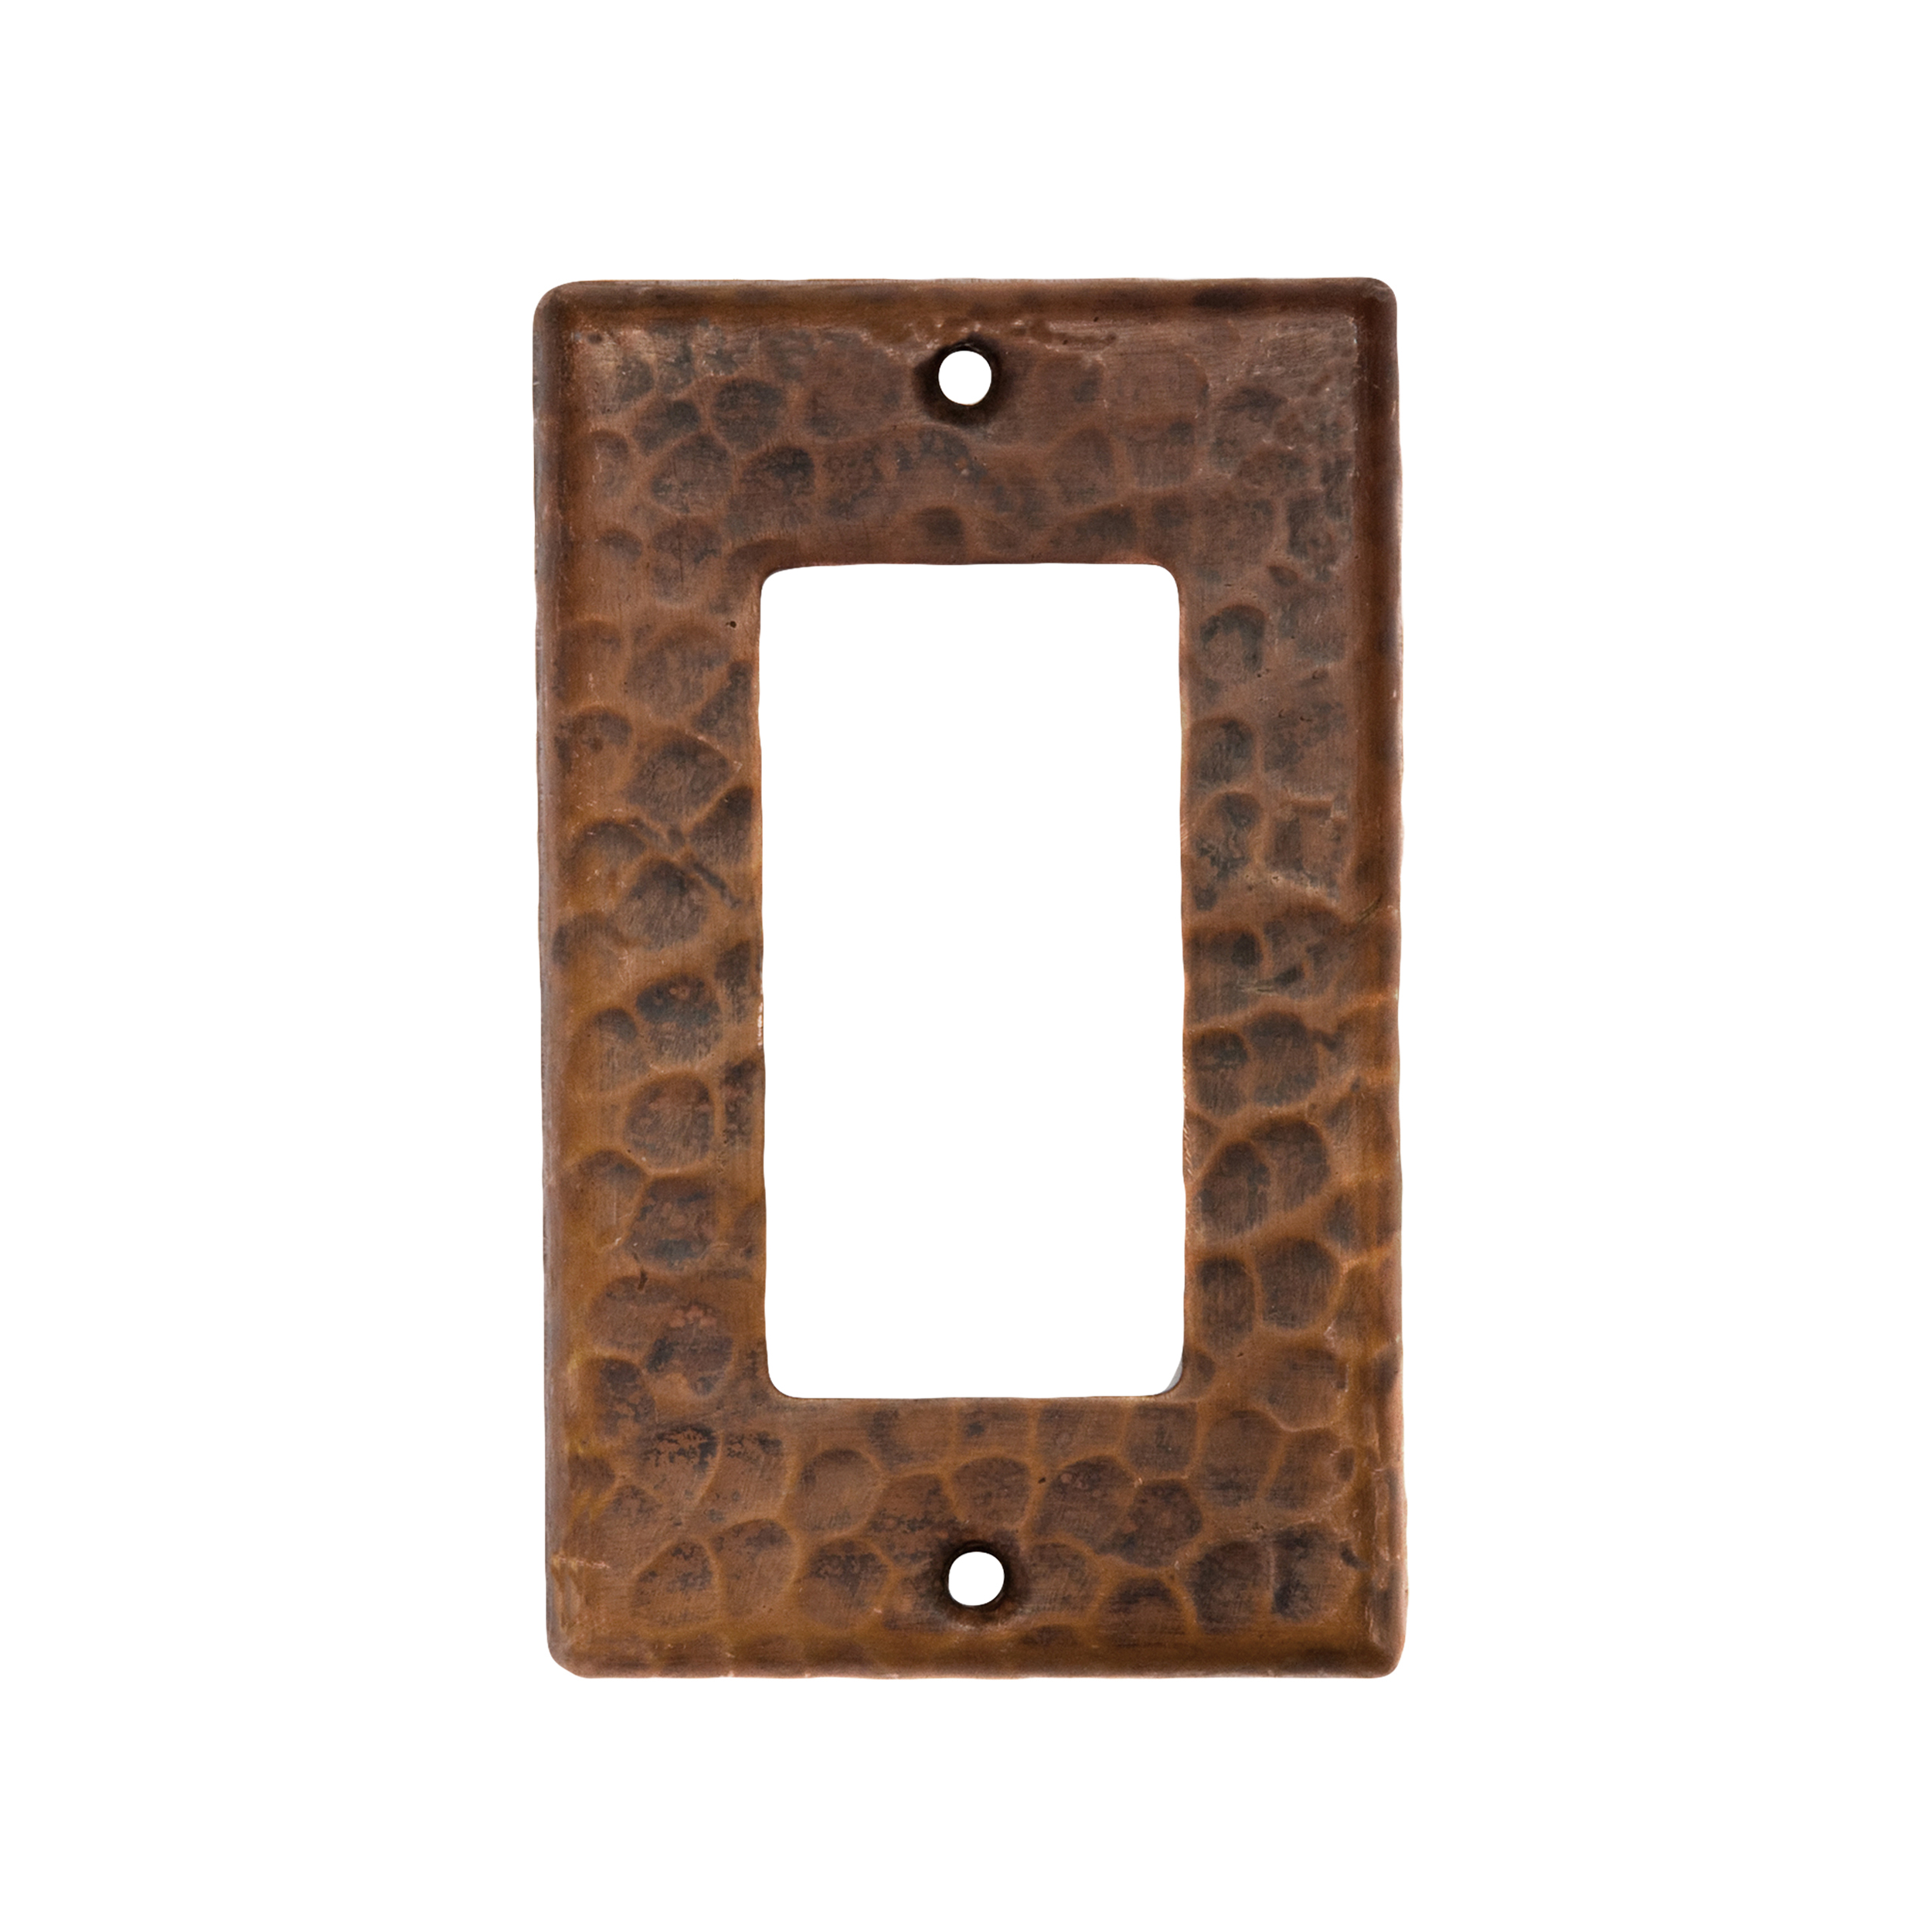 Single Ground Fault / Rocker Gfi Switchplate Cover